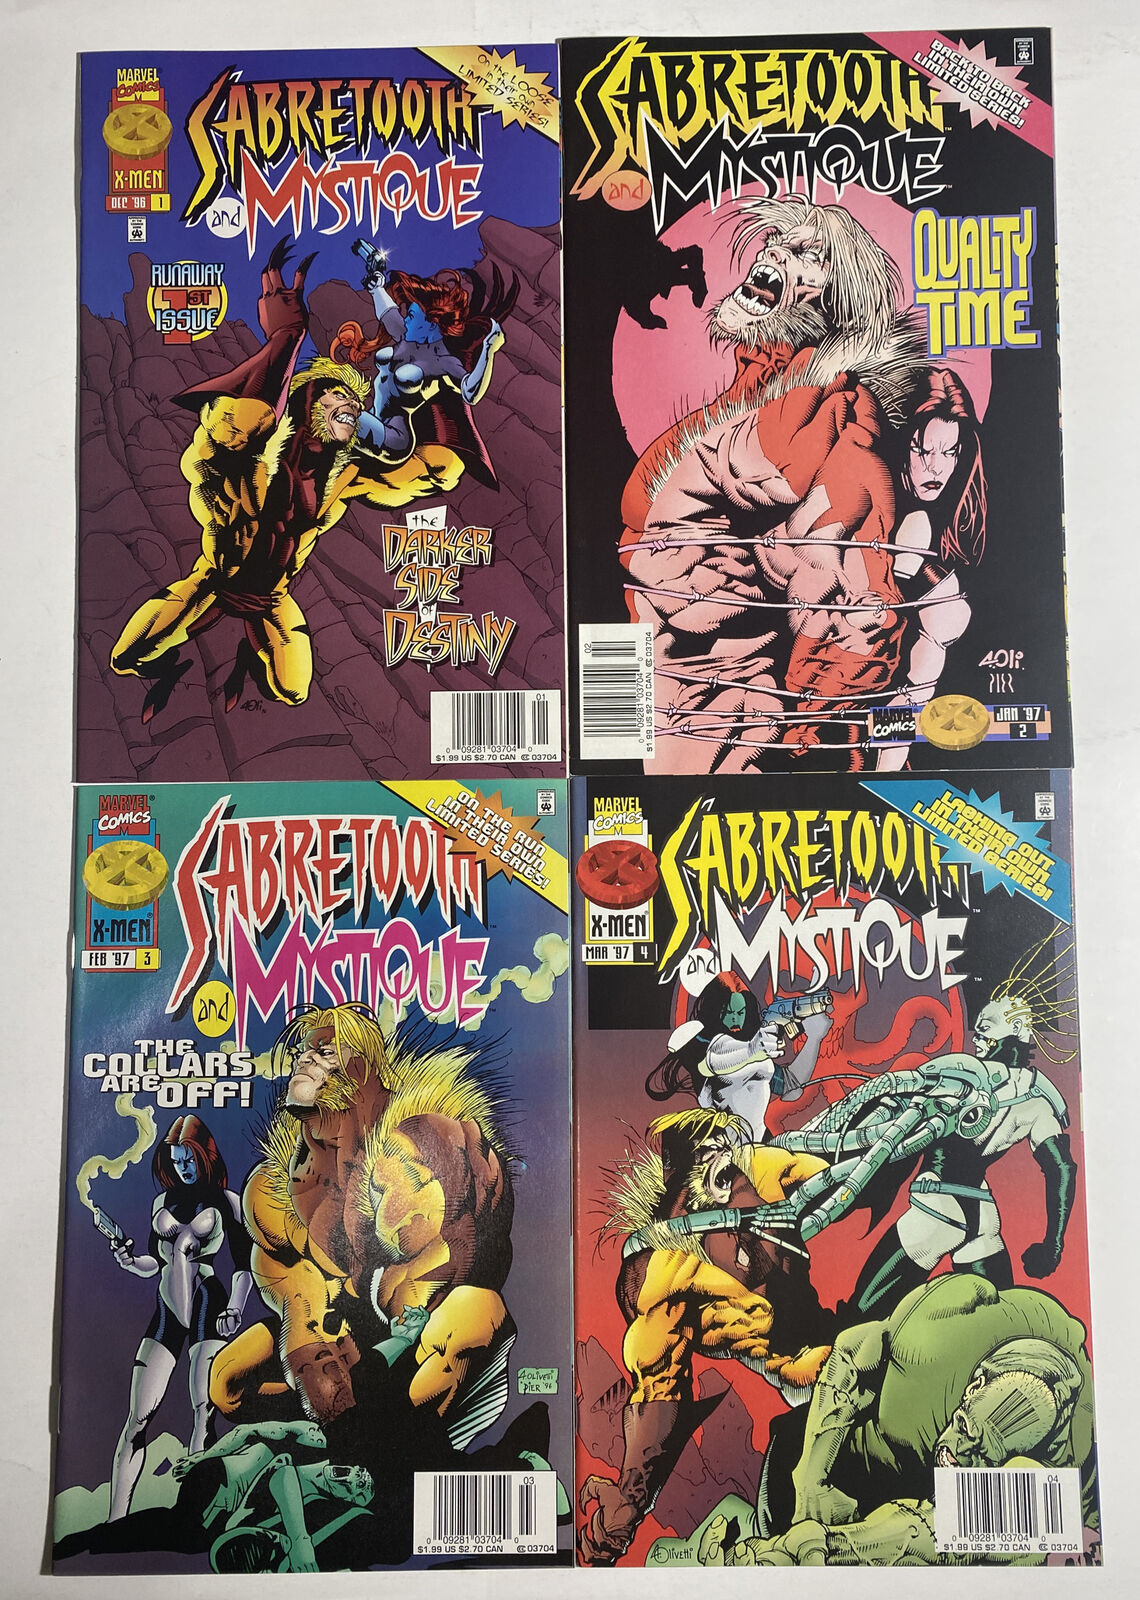 Sabretooth and Mystique 1-4 NEWSSTAND Variant Complete Mini-Series NM 1 2 3 4